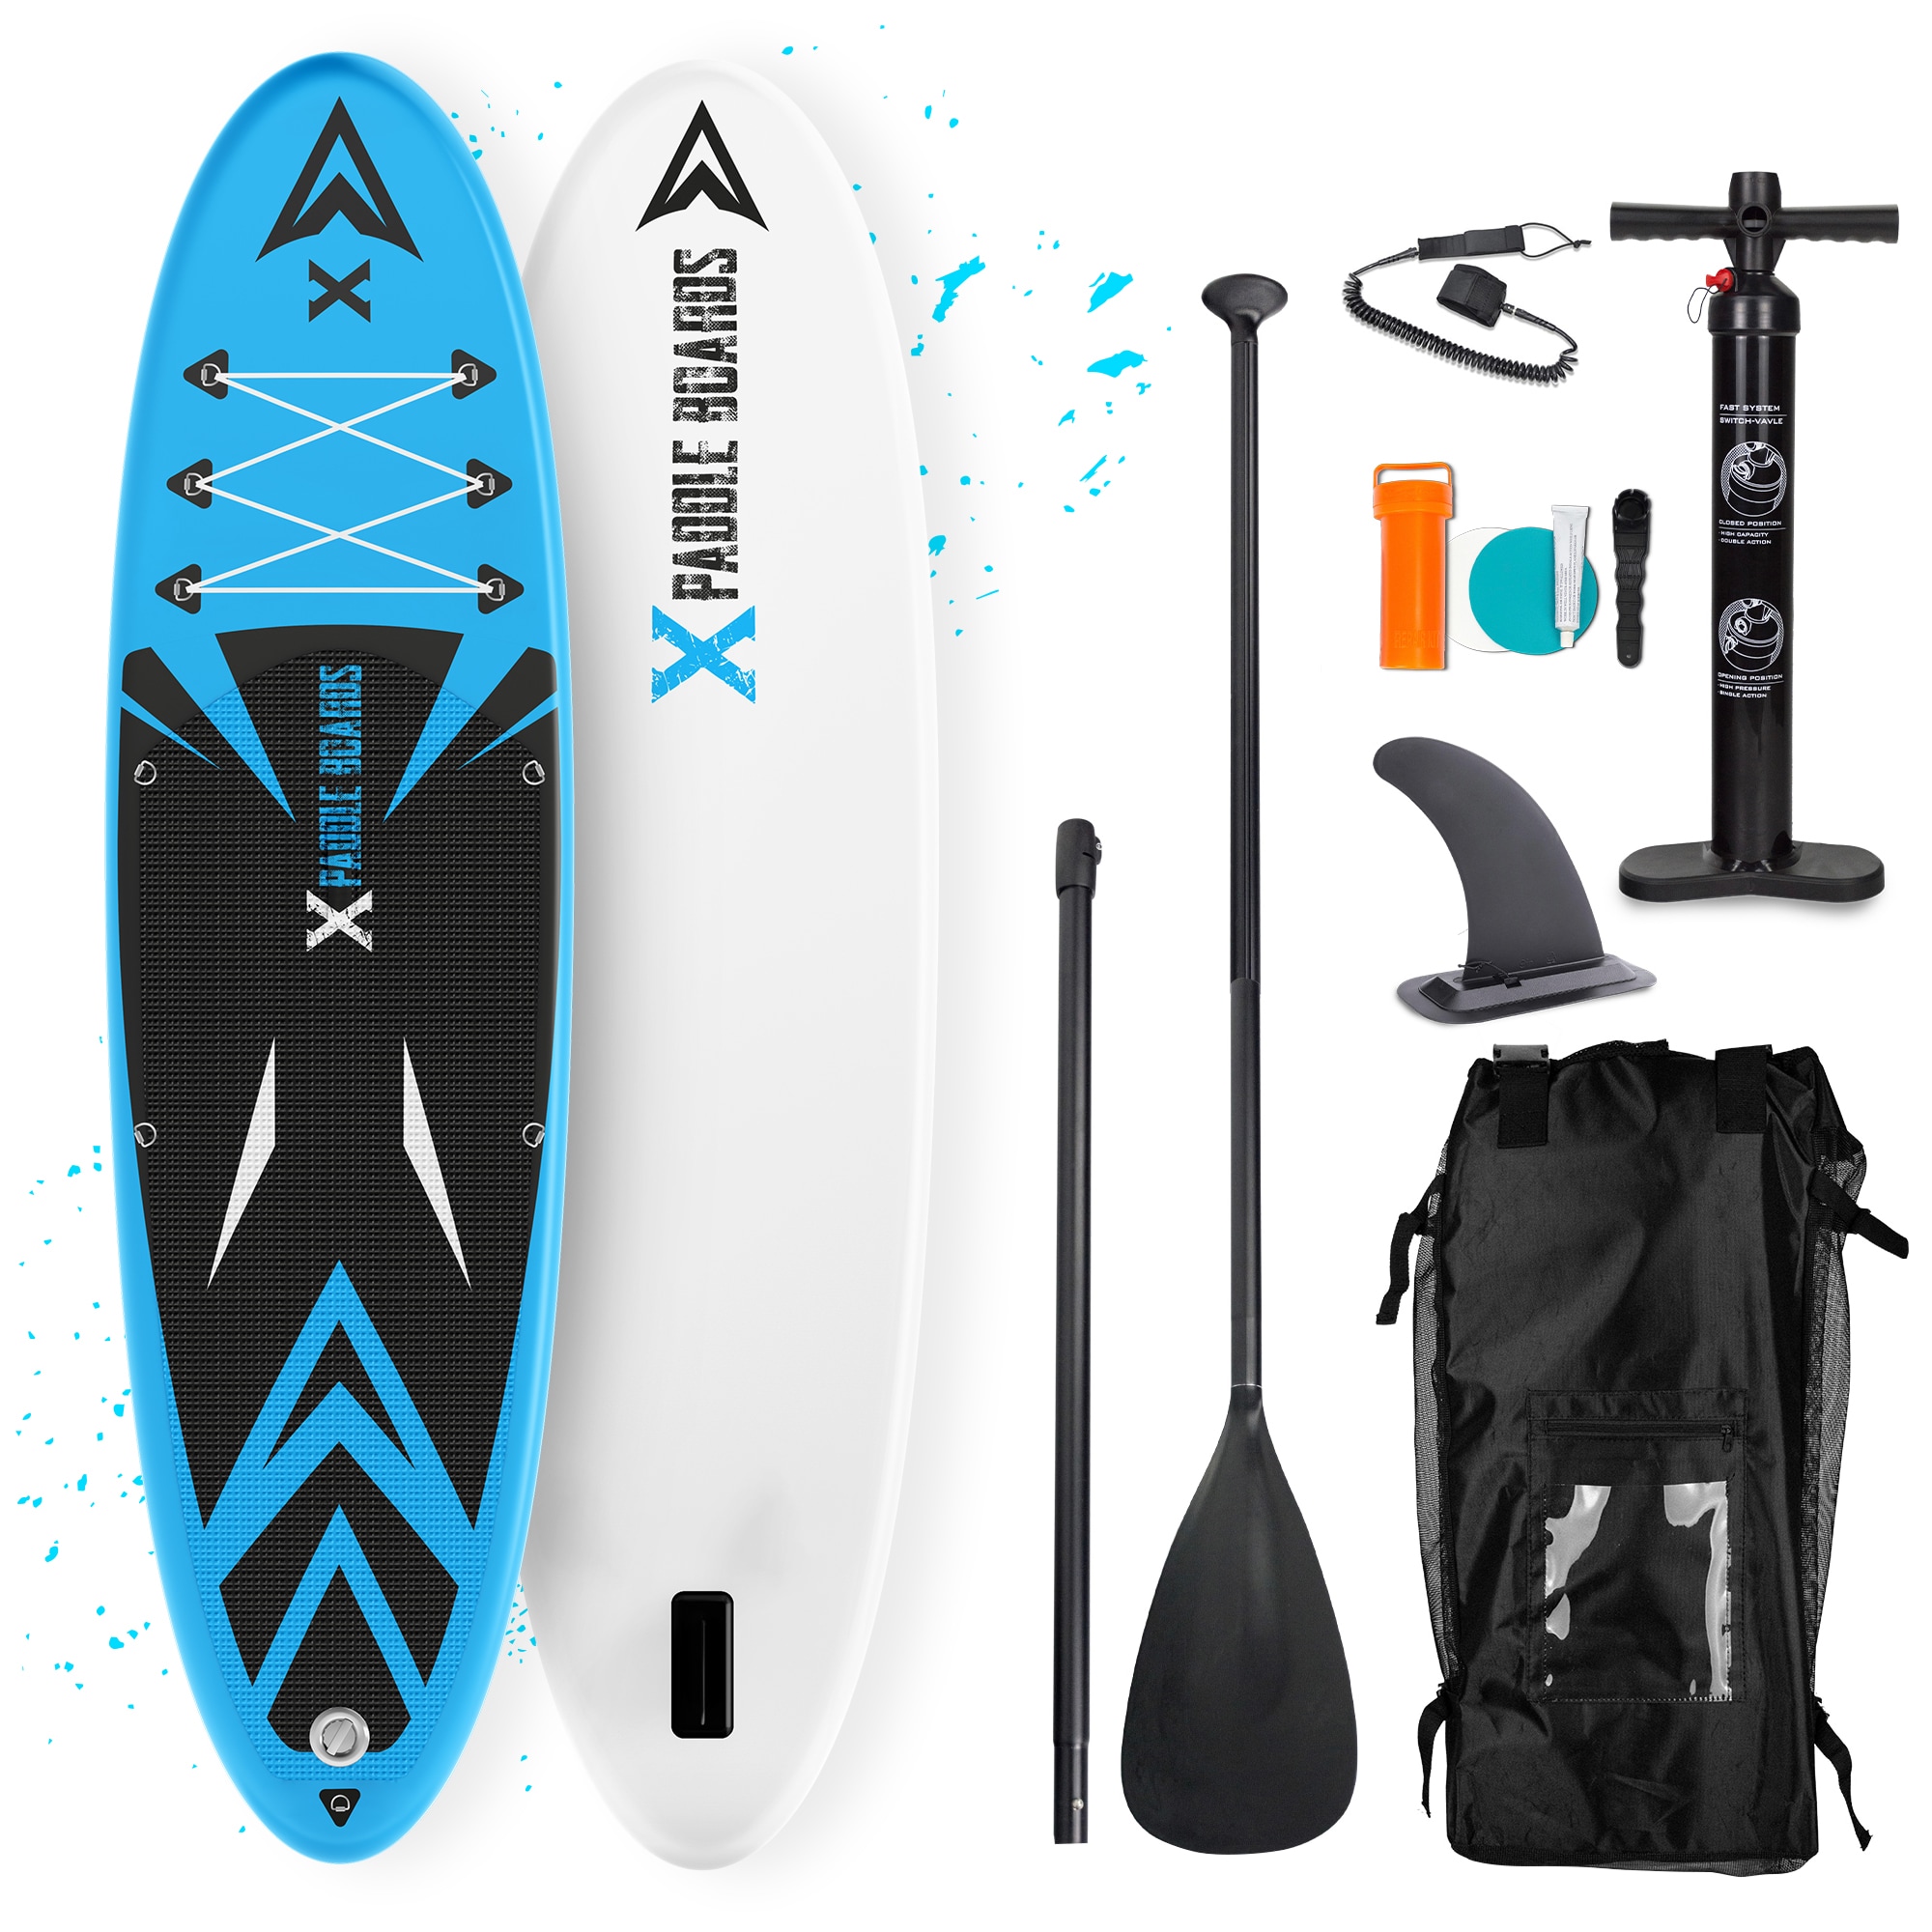 Paddle gonflable x-treme pack kayak